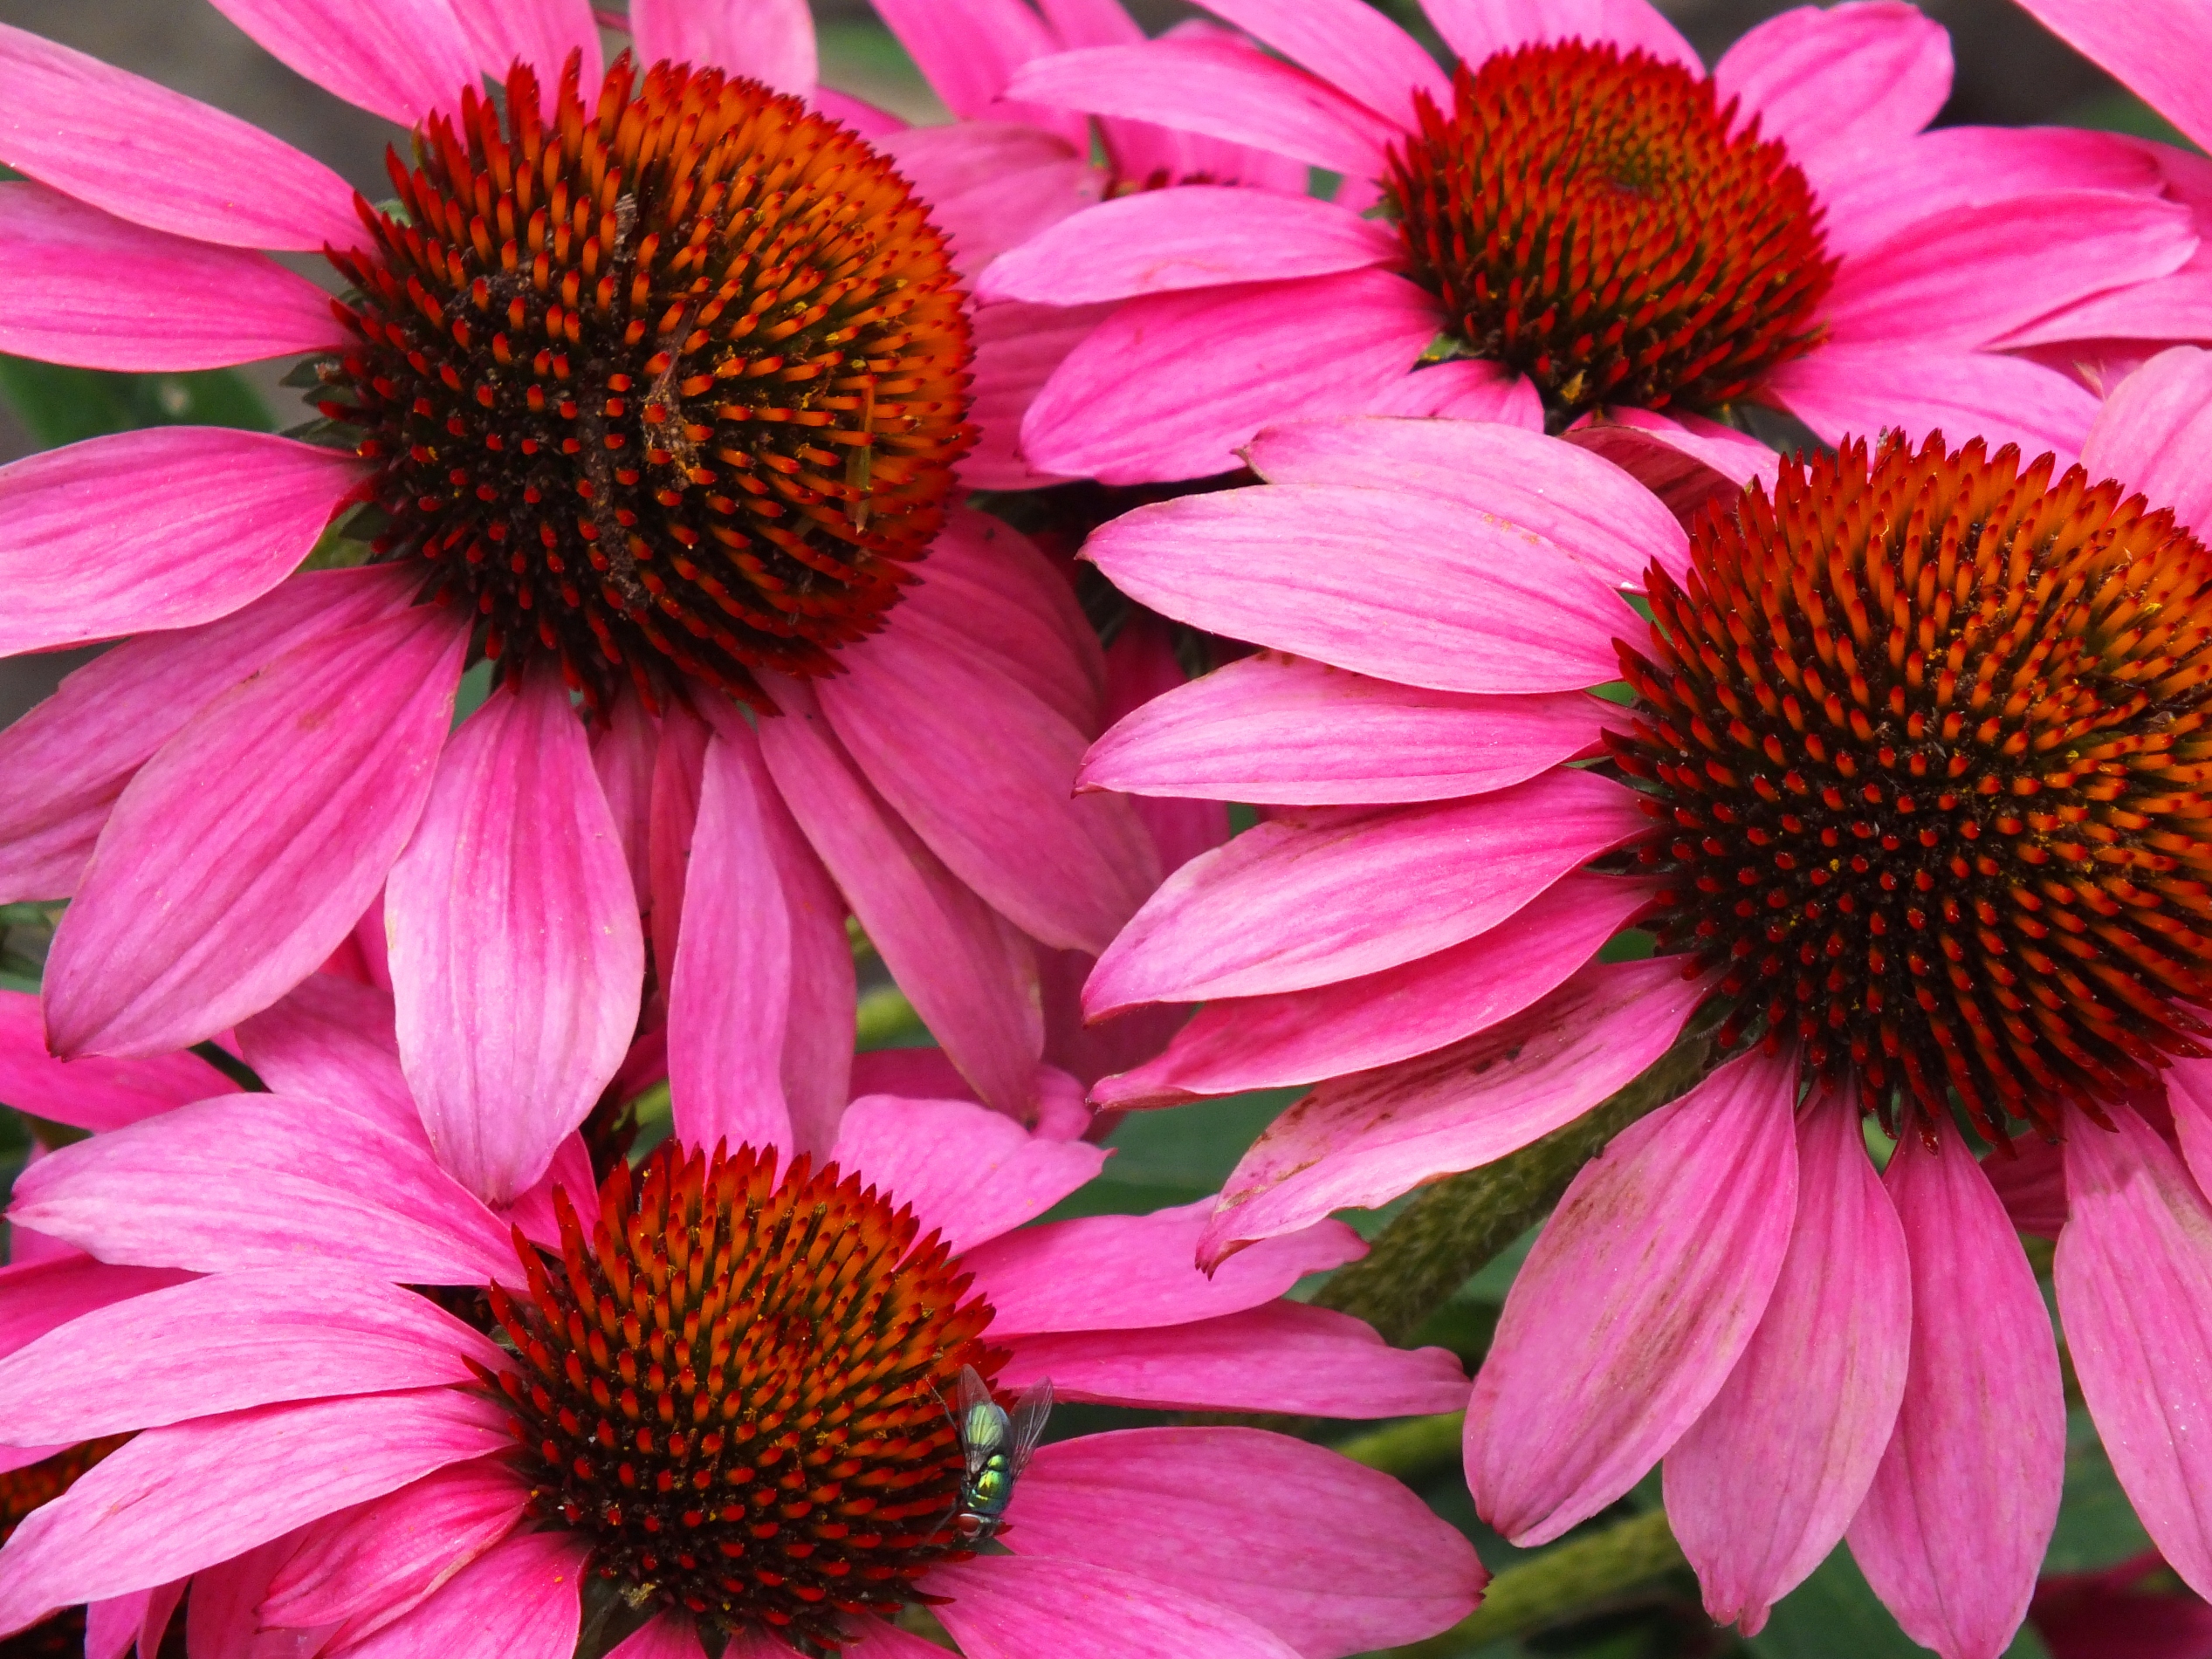 earth, coneflower, close up, echinacea, flower, fly, pink flower, flowers